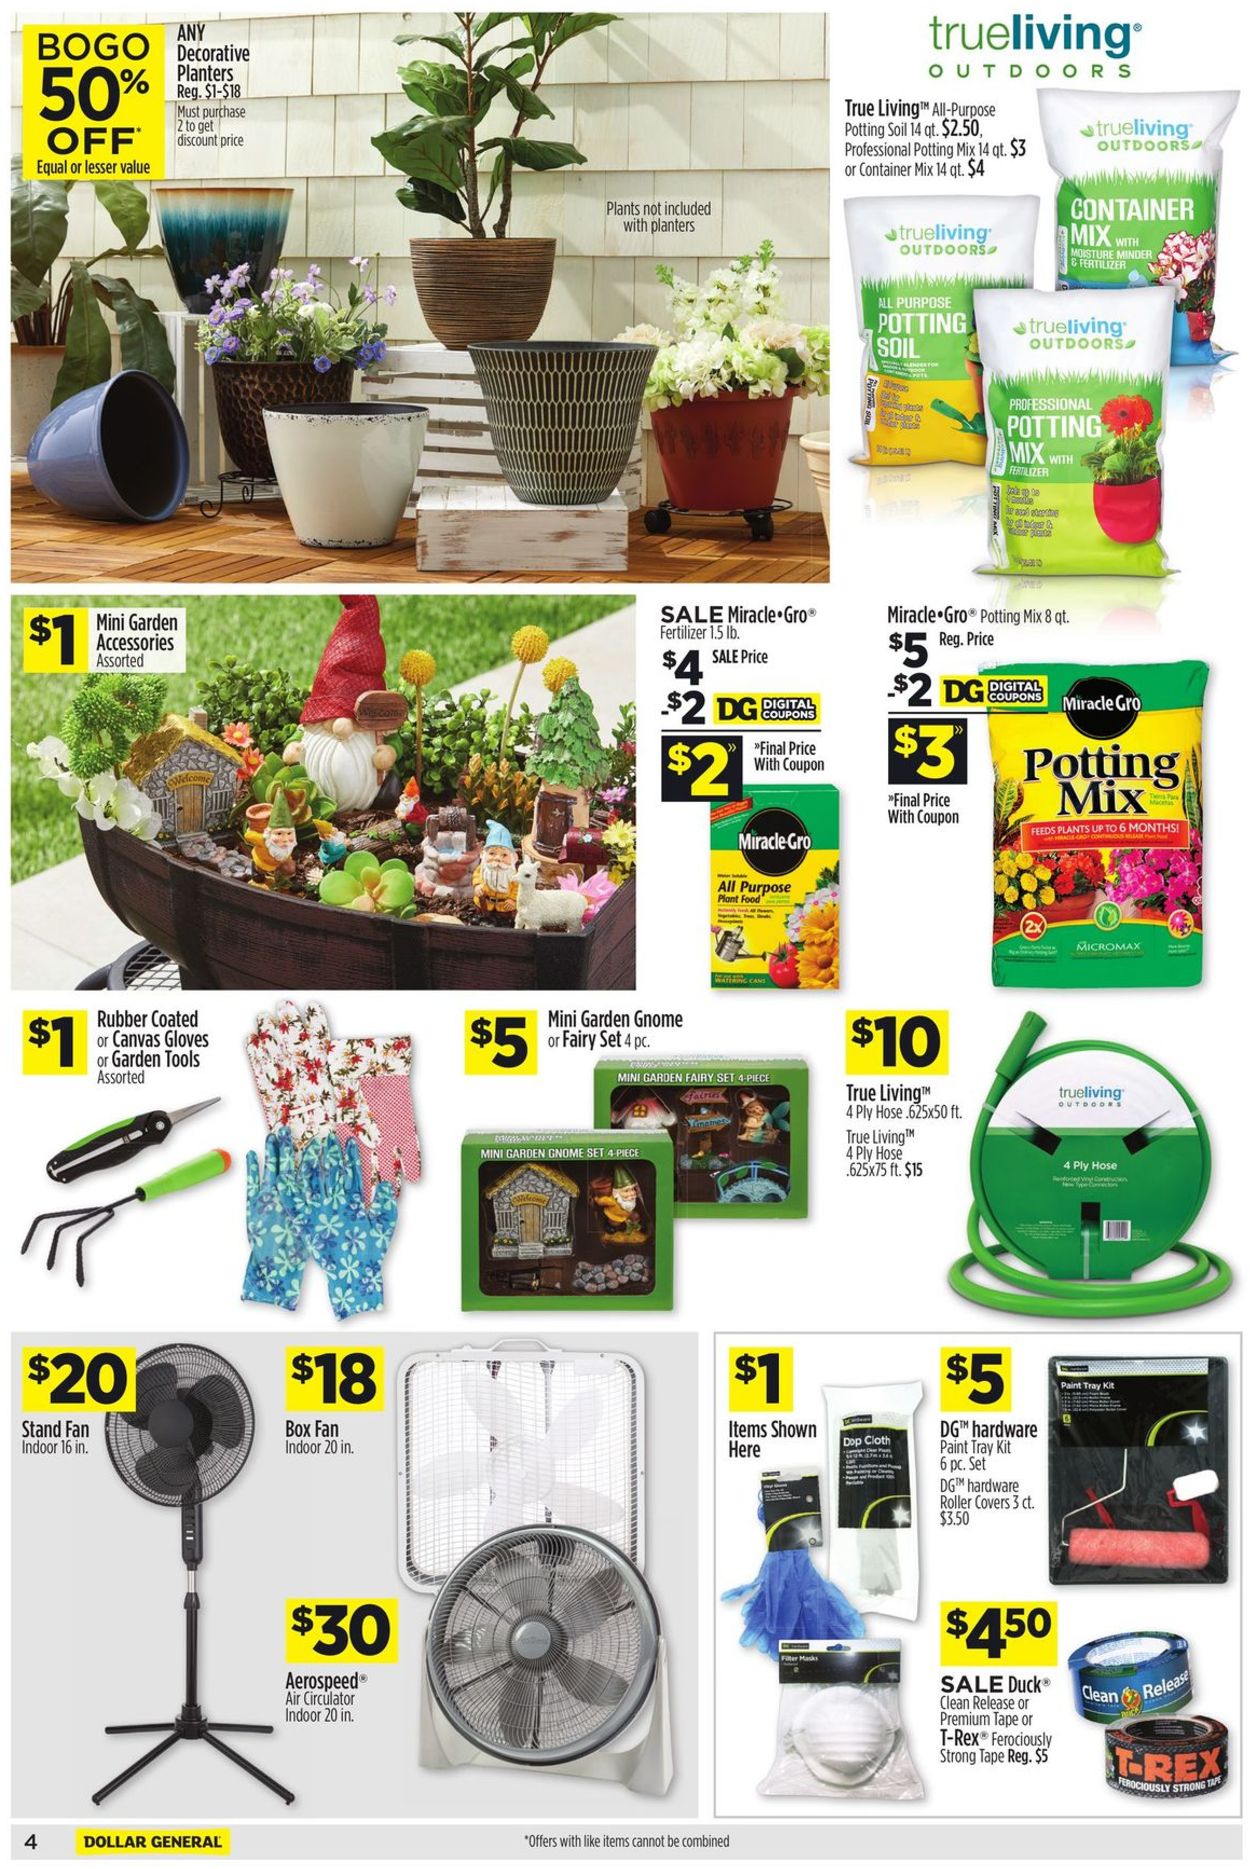 Dollar General Current weekly ad 05/03 - 05/09/2020 [8]